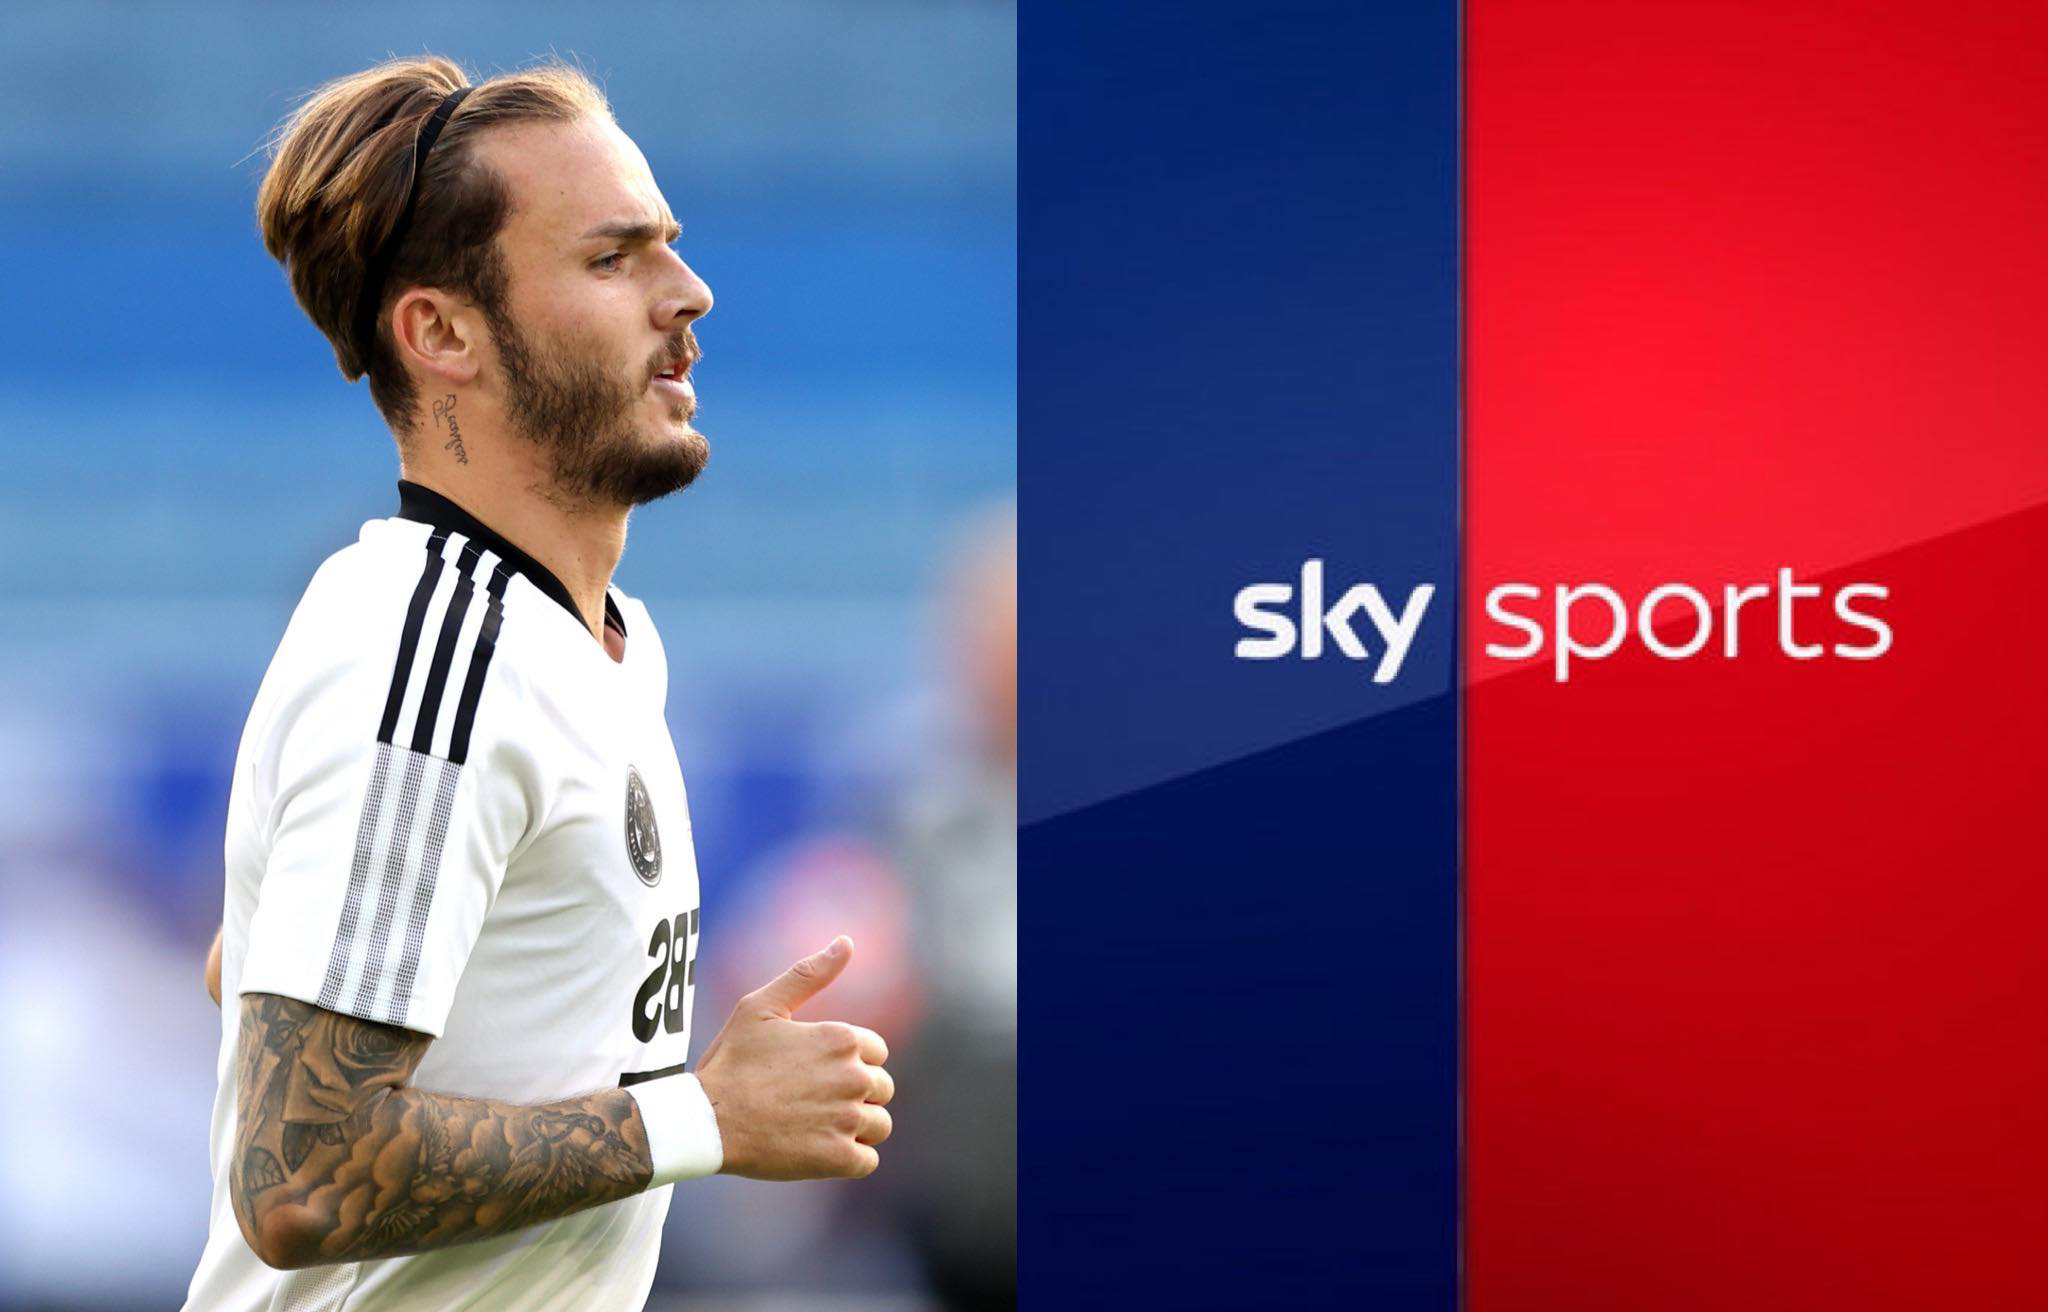 Sky Sports ‘breaking news’ reveals Newcastle’s latest bid for Leicester City’s James Maddison